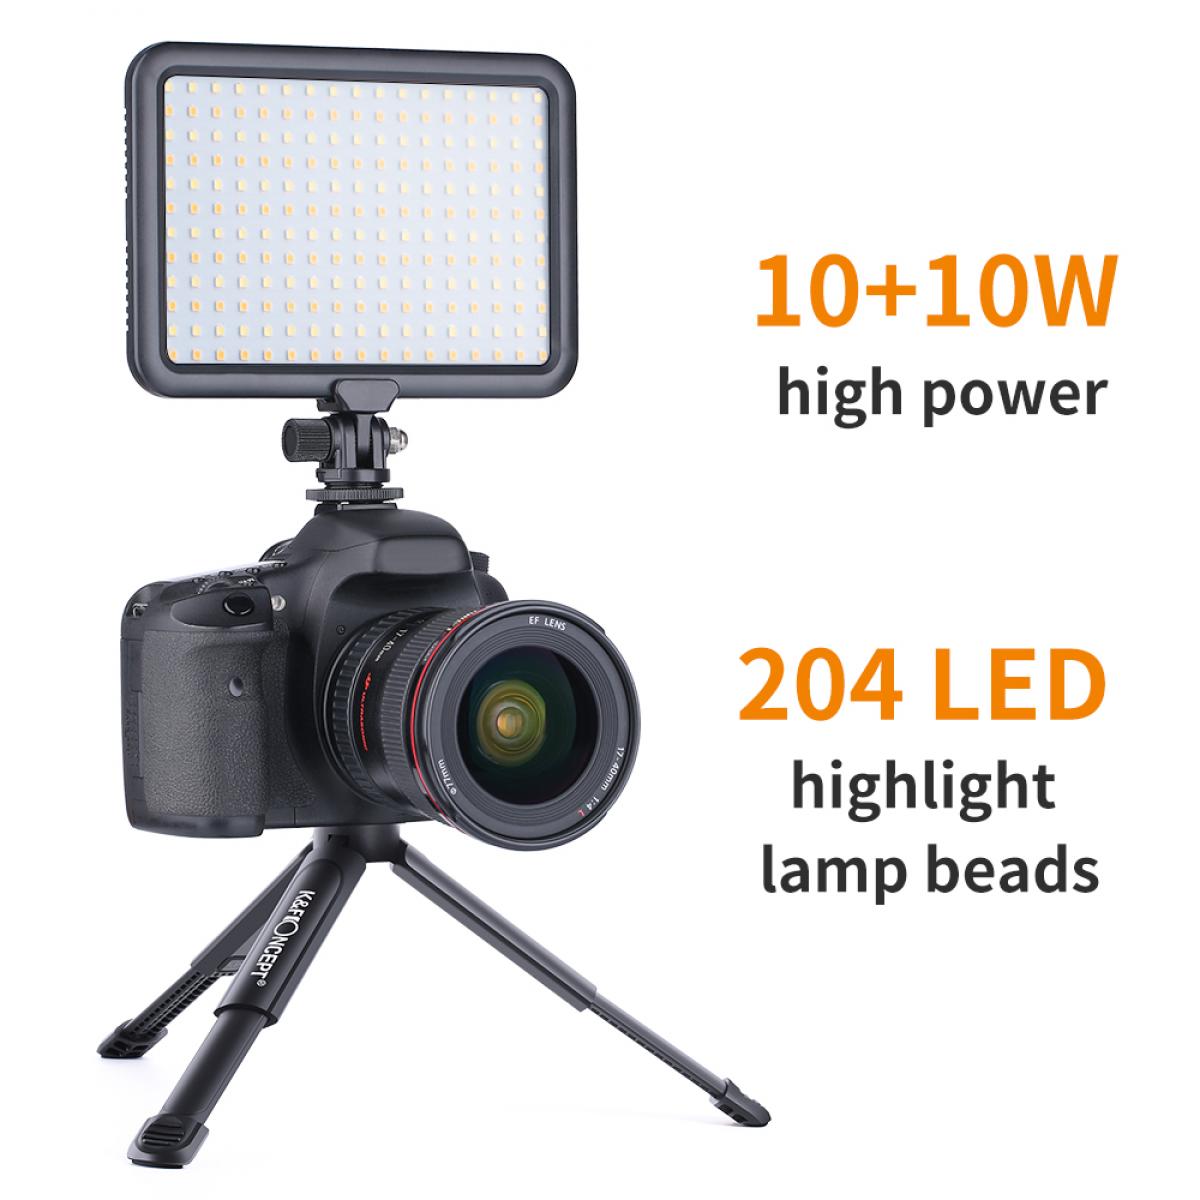 Camera Light LED Video Light Panel for Camera Camcorder Lighting in Studio or Outdoors 3200K to 5500K Variable Color Temperature 